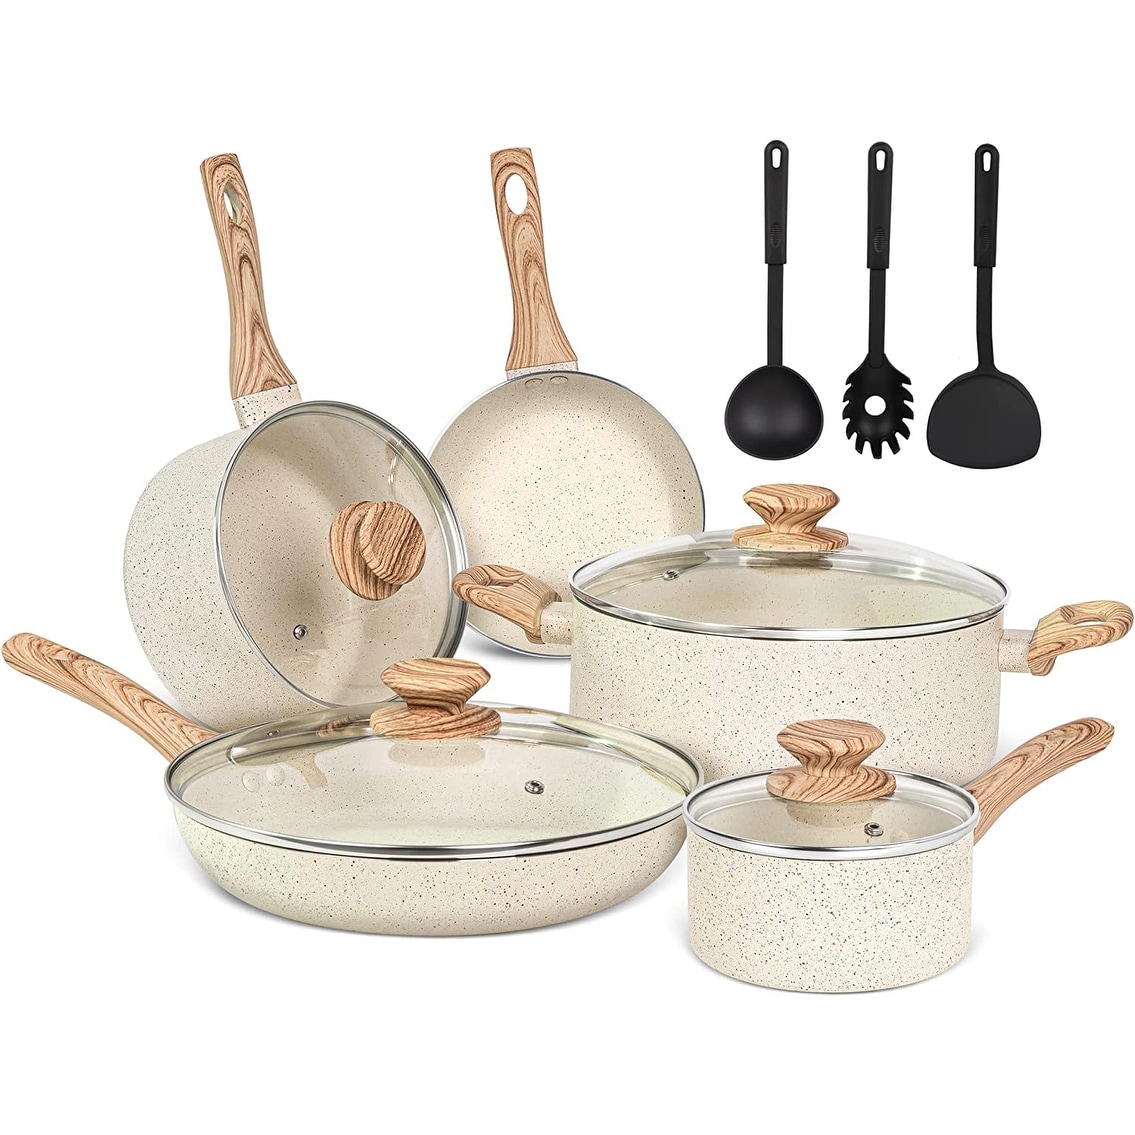 https://ak1.ostkcdn.com/images/products/is/images/direct/7d5a173971fba66062f6754dd770c1c848e9b898/White-Pots-and-Pans-Set-Nonstick-Cookware-Sets%2C-12pcs-White-Granite-Cookware-Set-Induction-Compatible.jpg